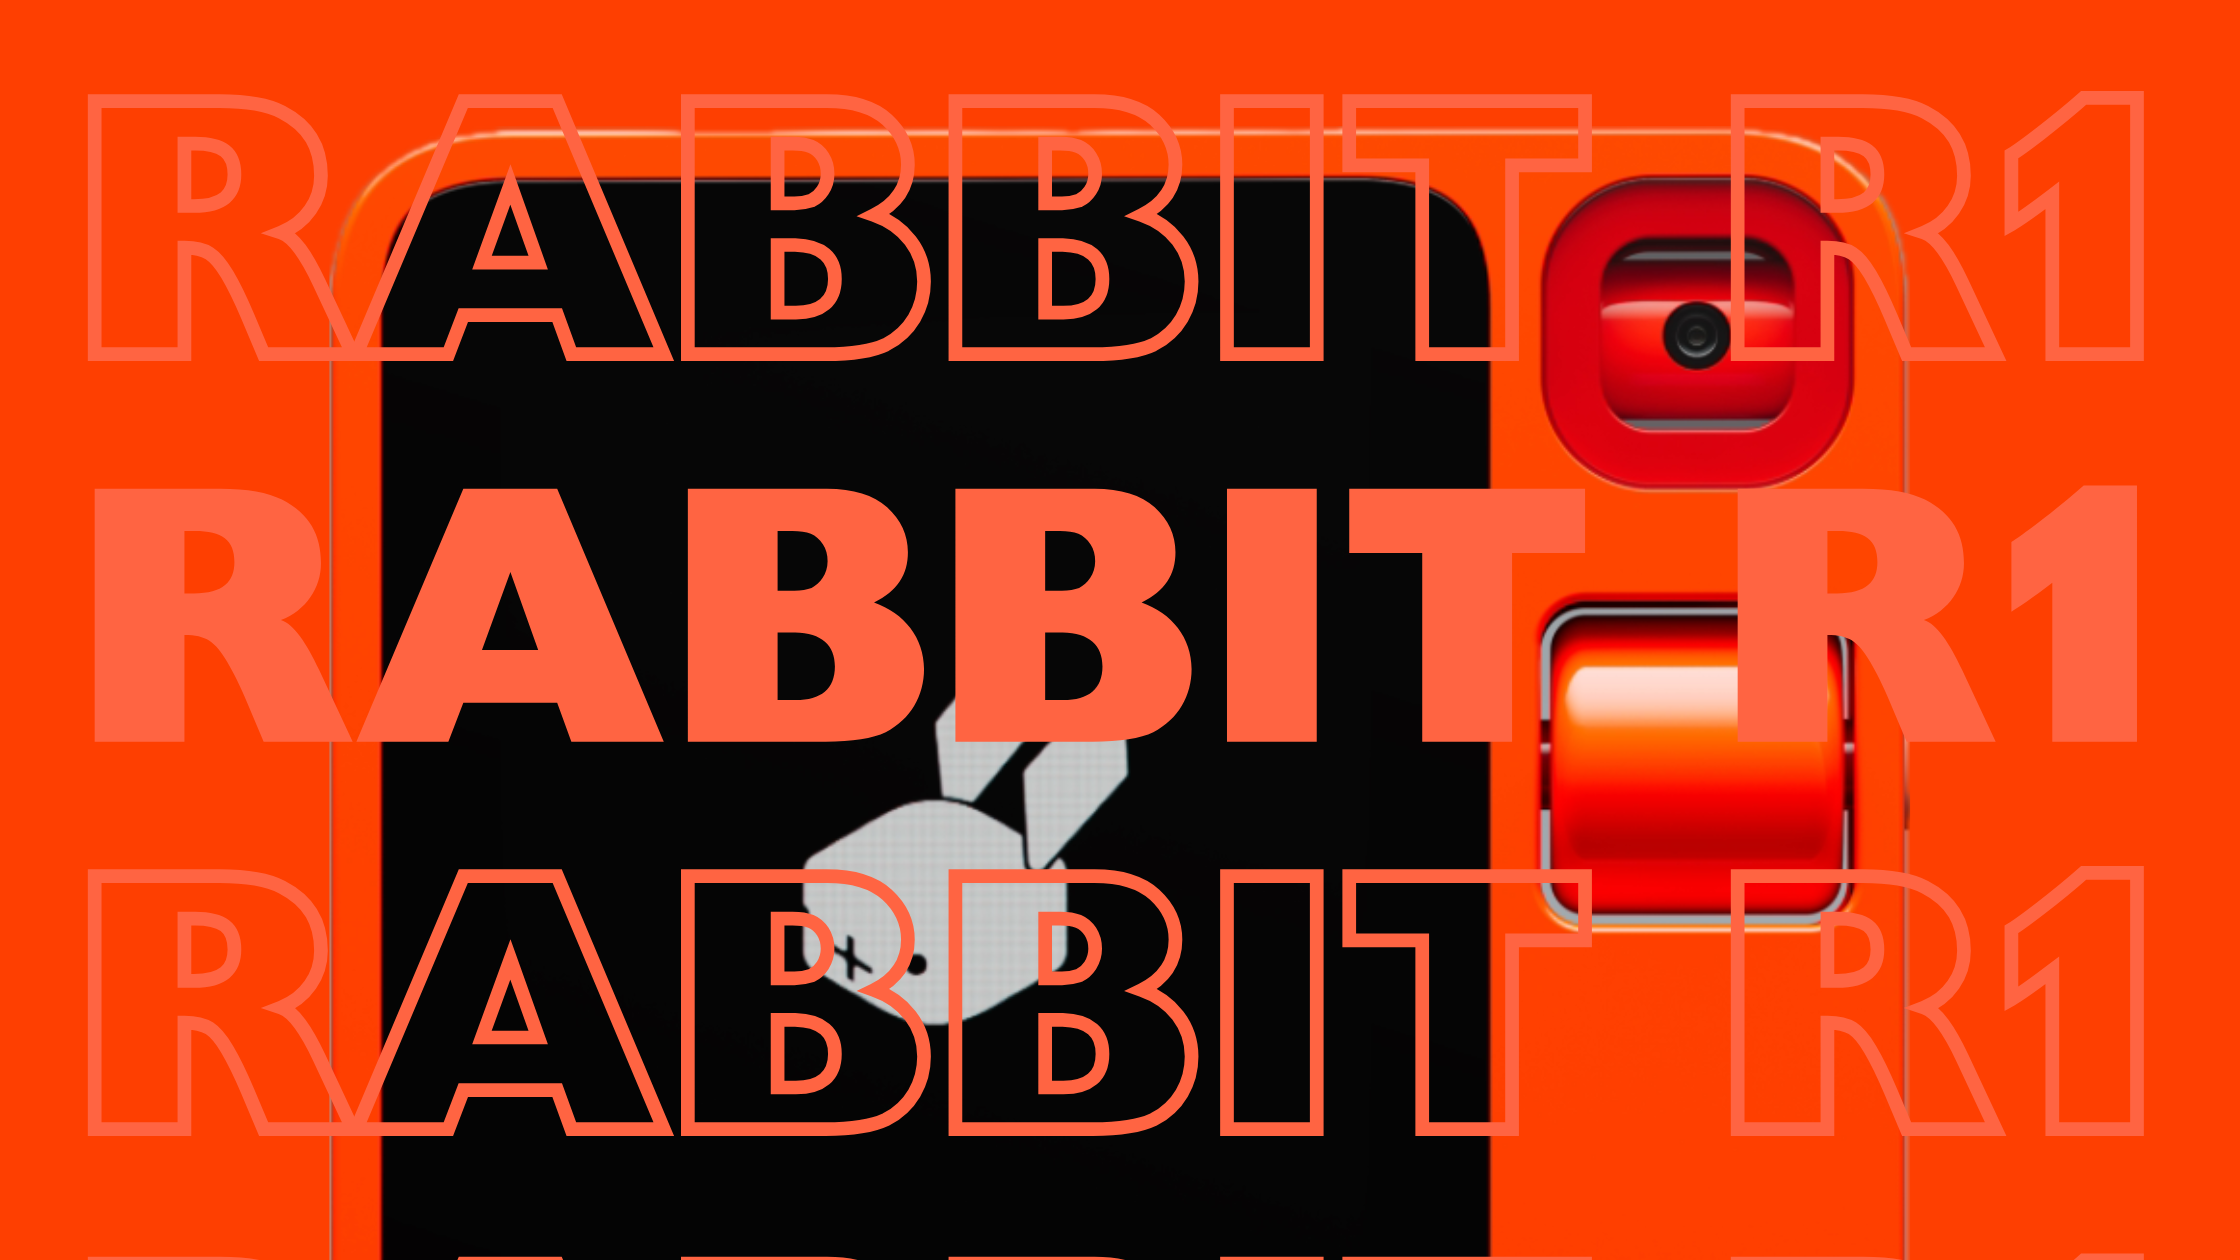 Rabbit R1 Device Price, Specs & Release Date: This Gadget Can Do Anything  For You - Times Report